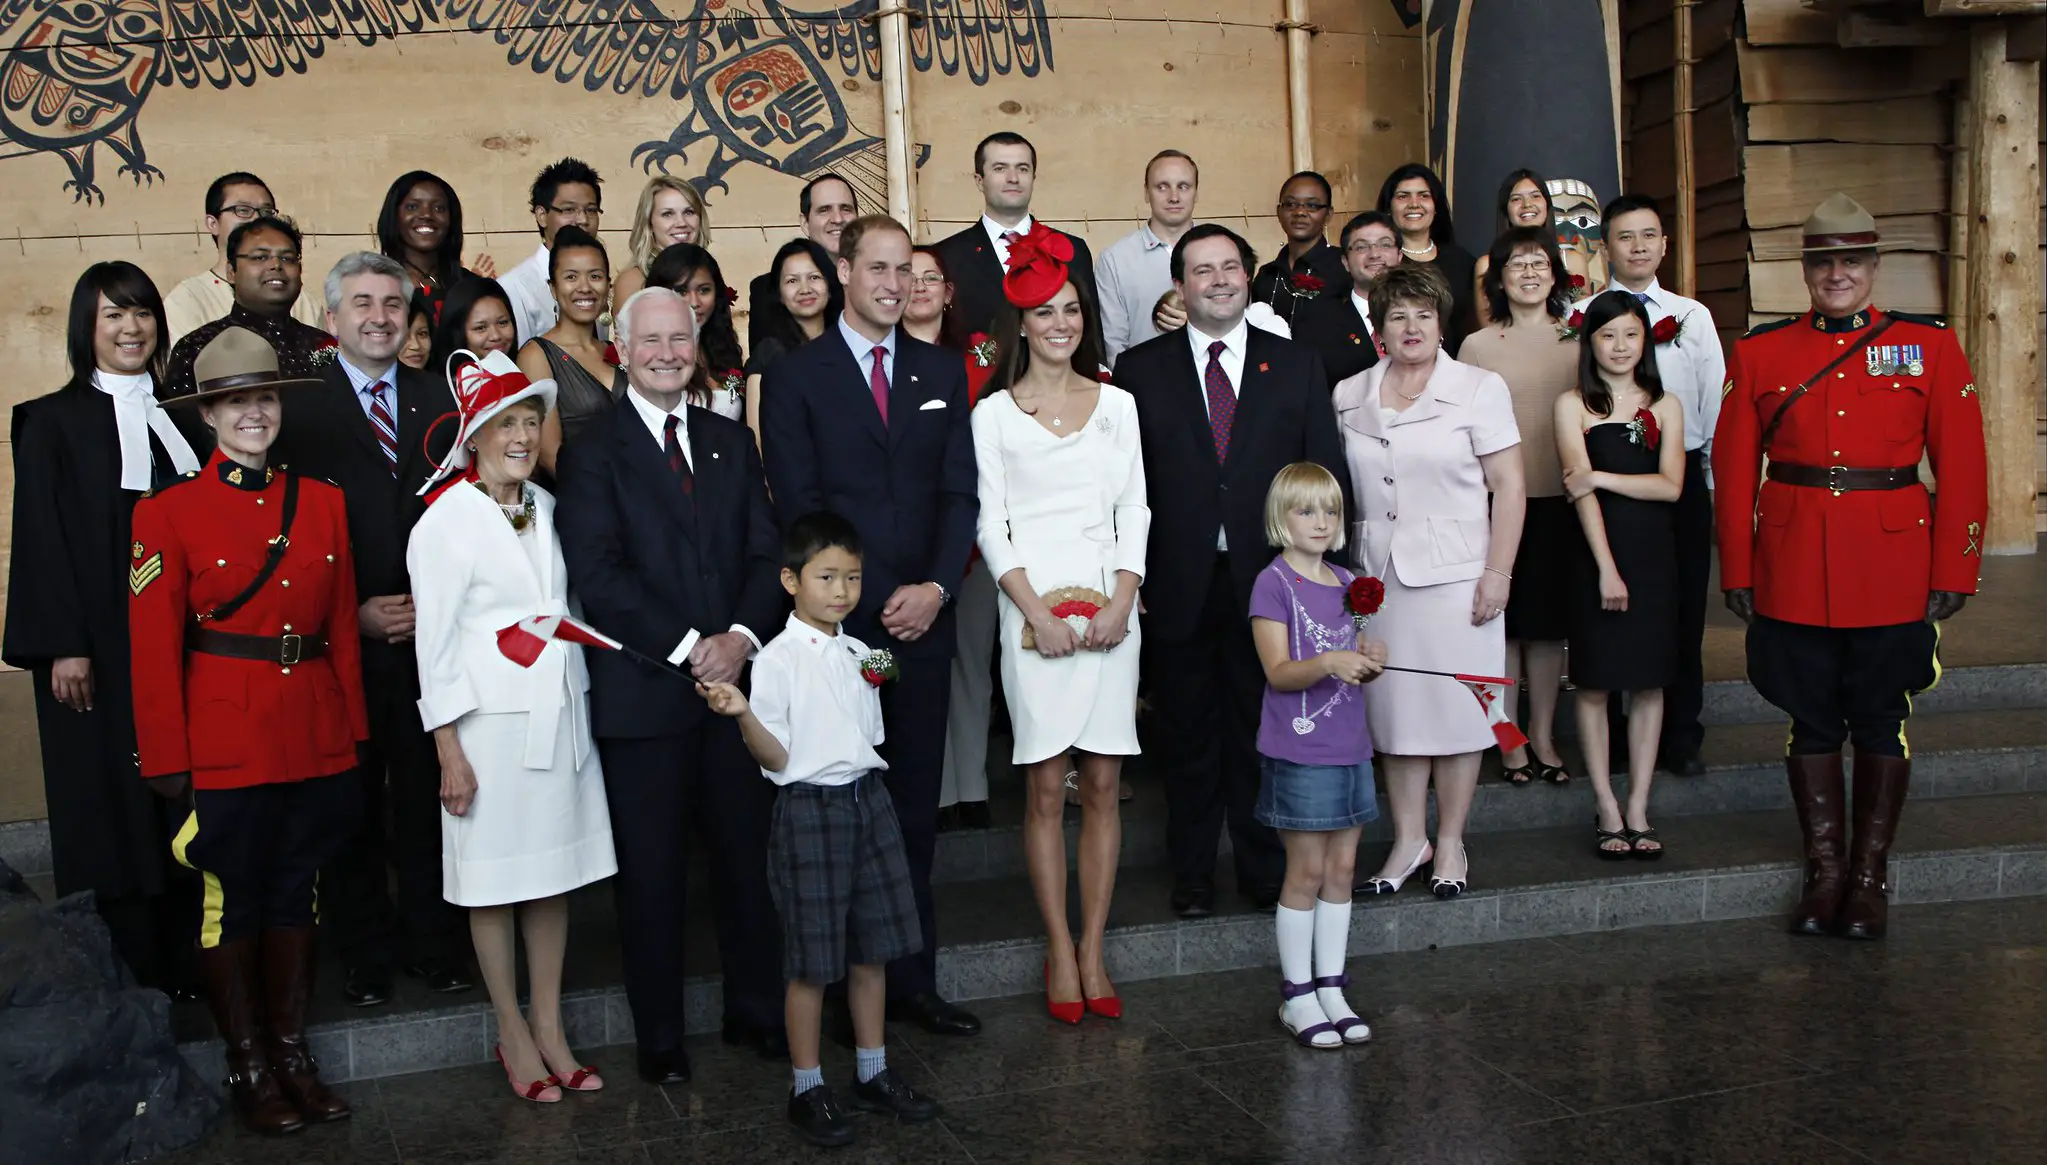 The Duke and Duchess of Cambridge attended Citizenship Ceremony during canada tour 2011